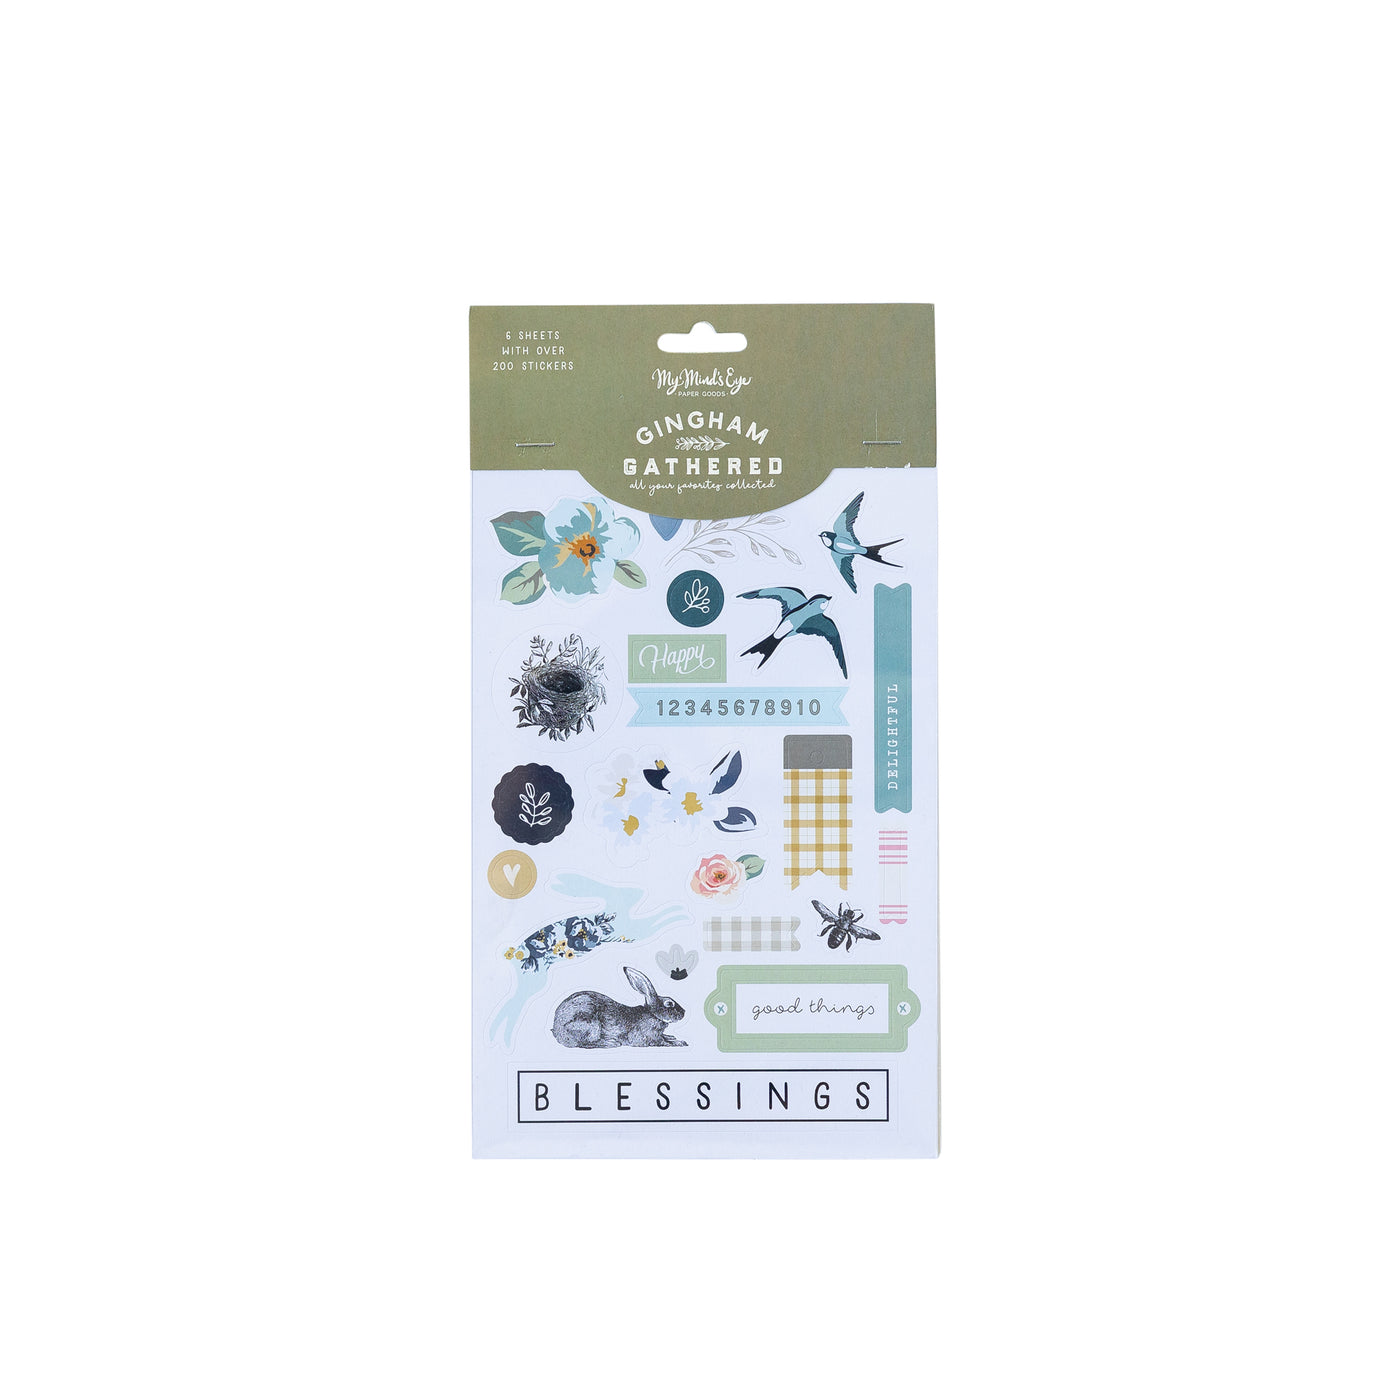 Gingham Gathered Collection Kit